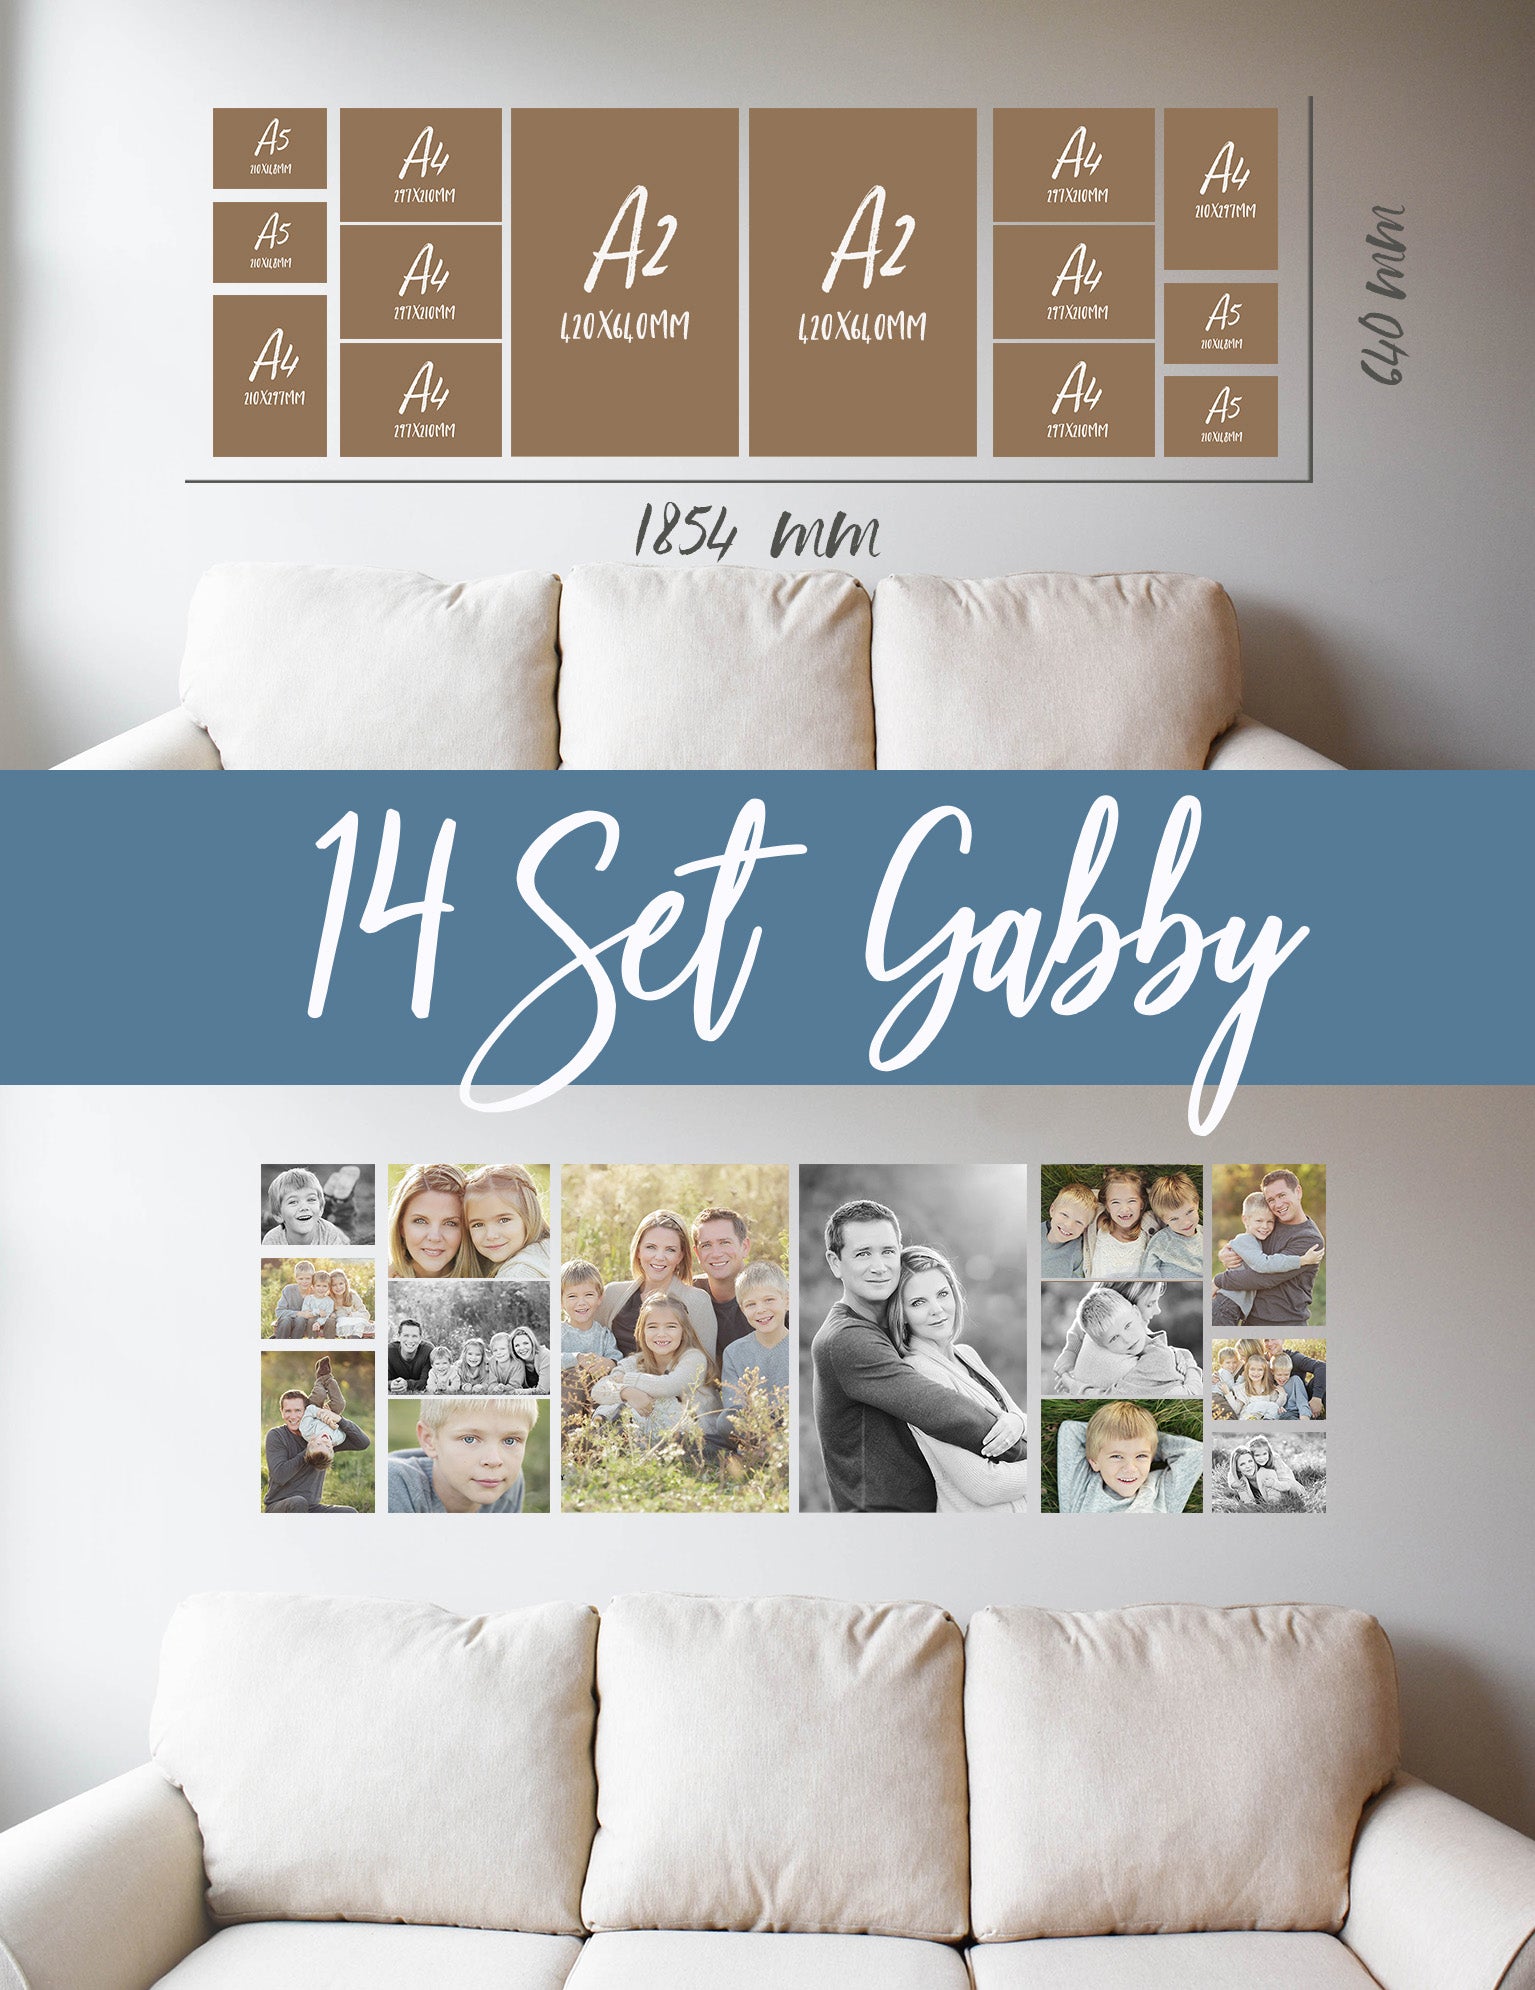 Story Wall Collage | 14 Set | Gabby